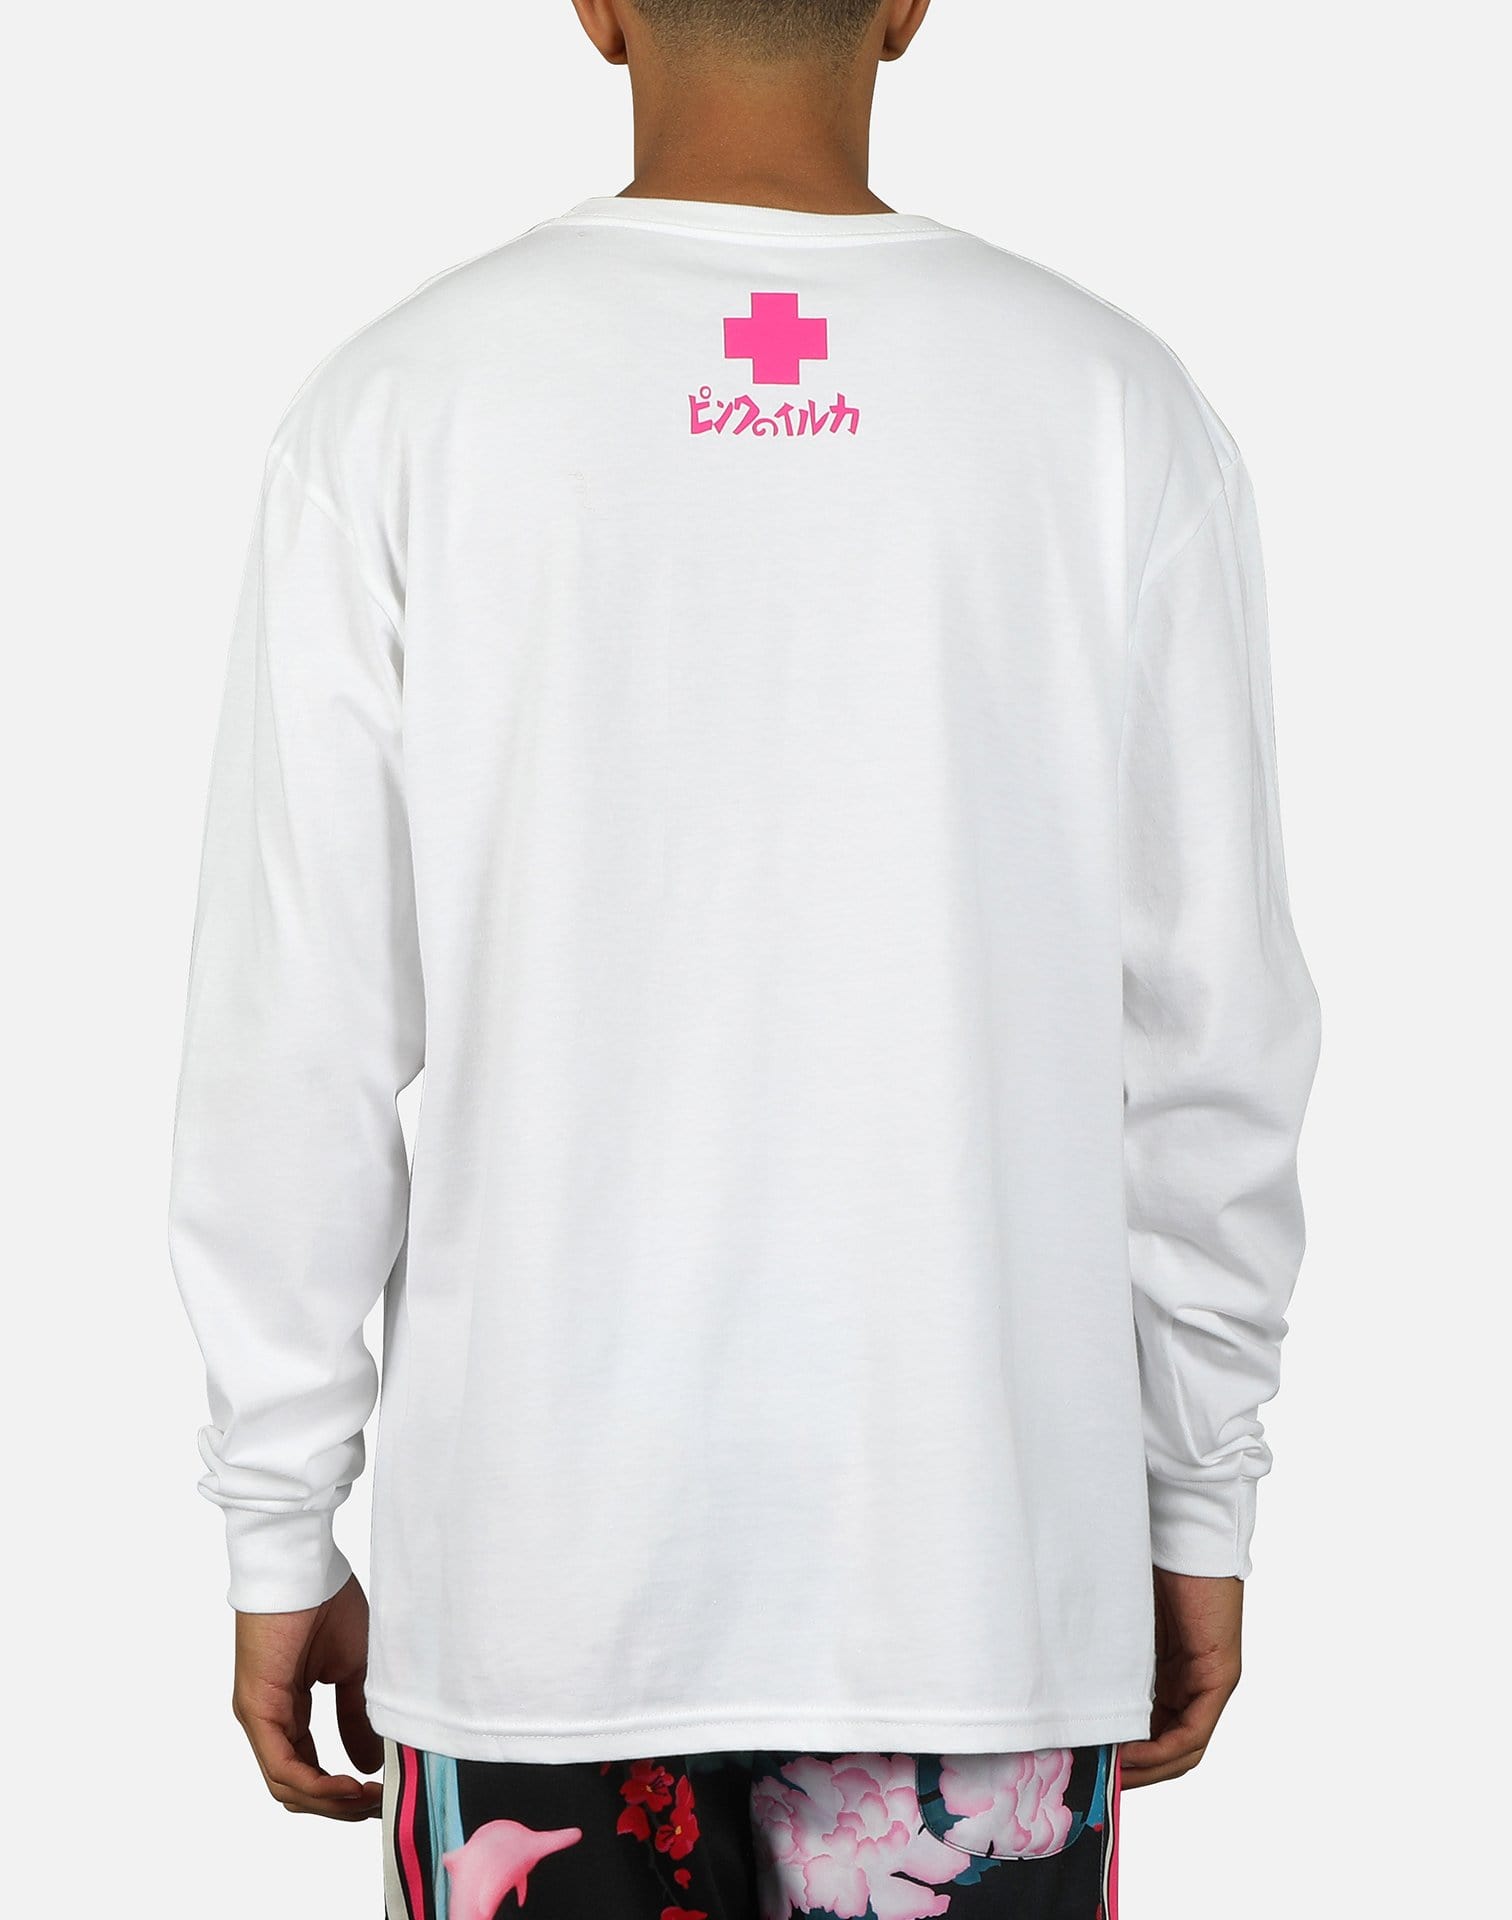 Pink Dolphin Men's Legendary Archive Long-Sleeve Tee